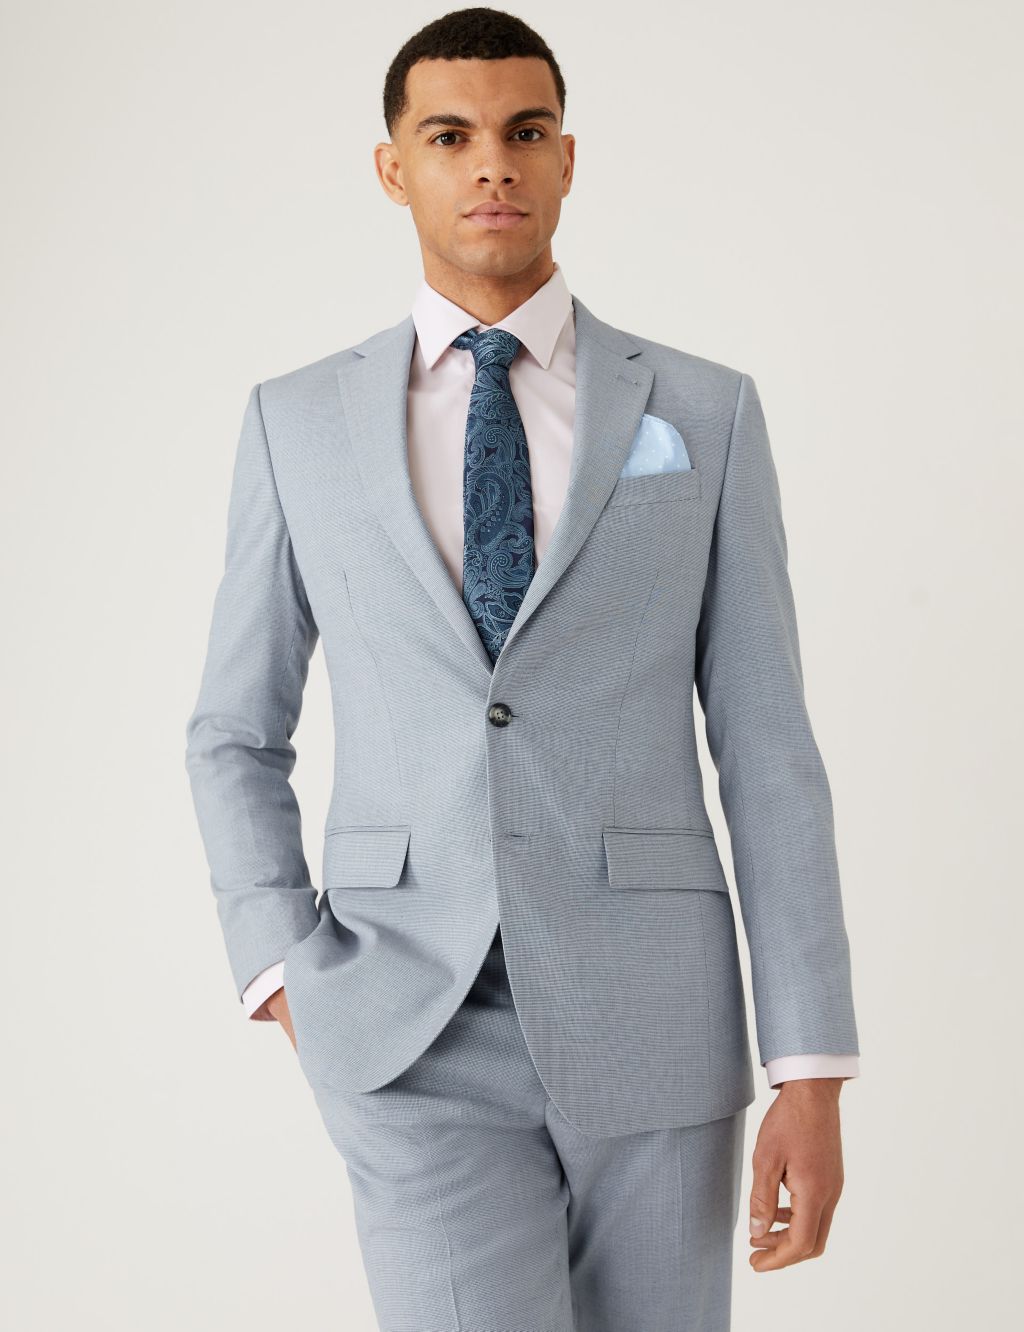 Slim Fit Micro Puppytooth Suit Jacket image 1